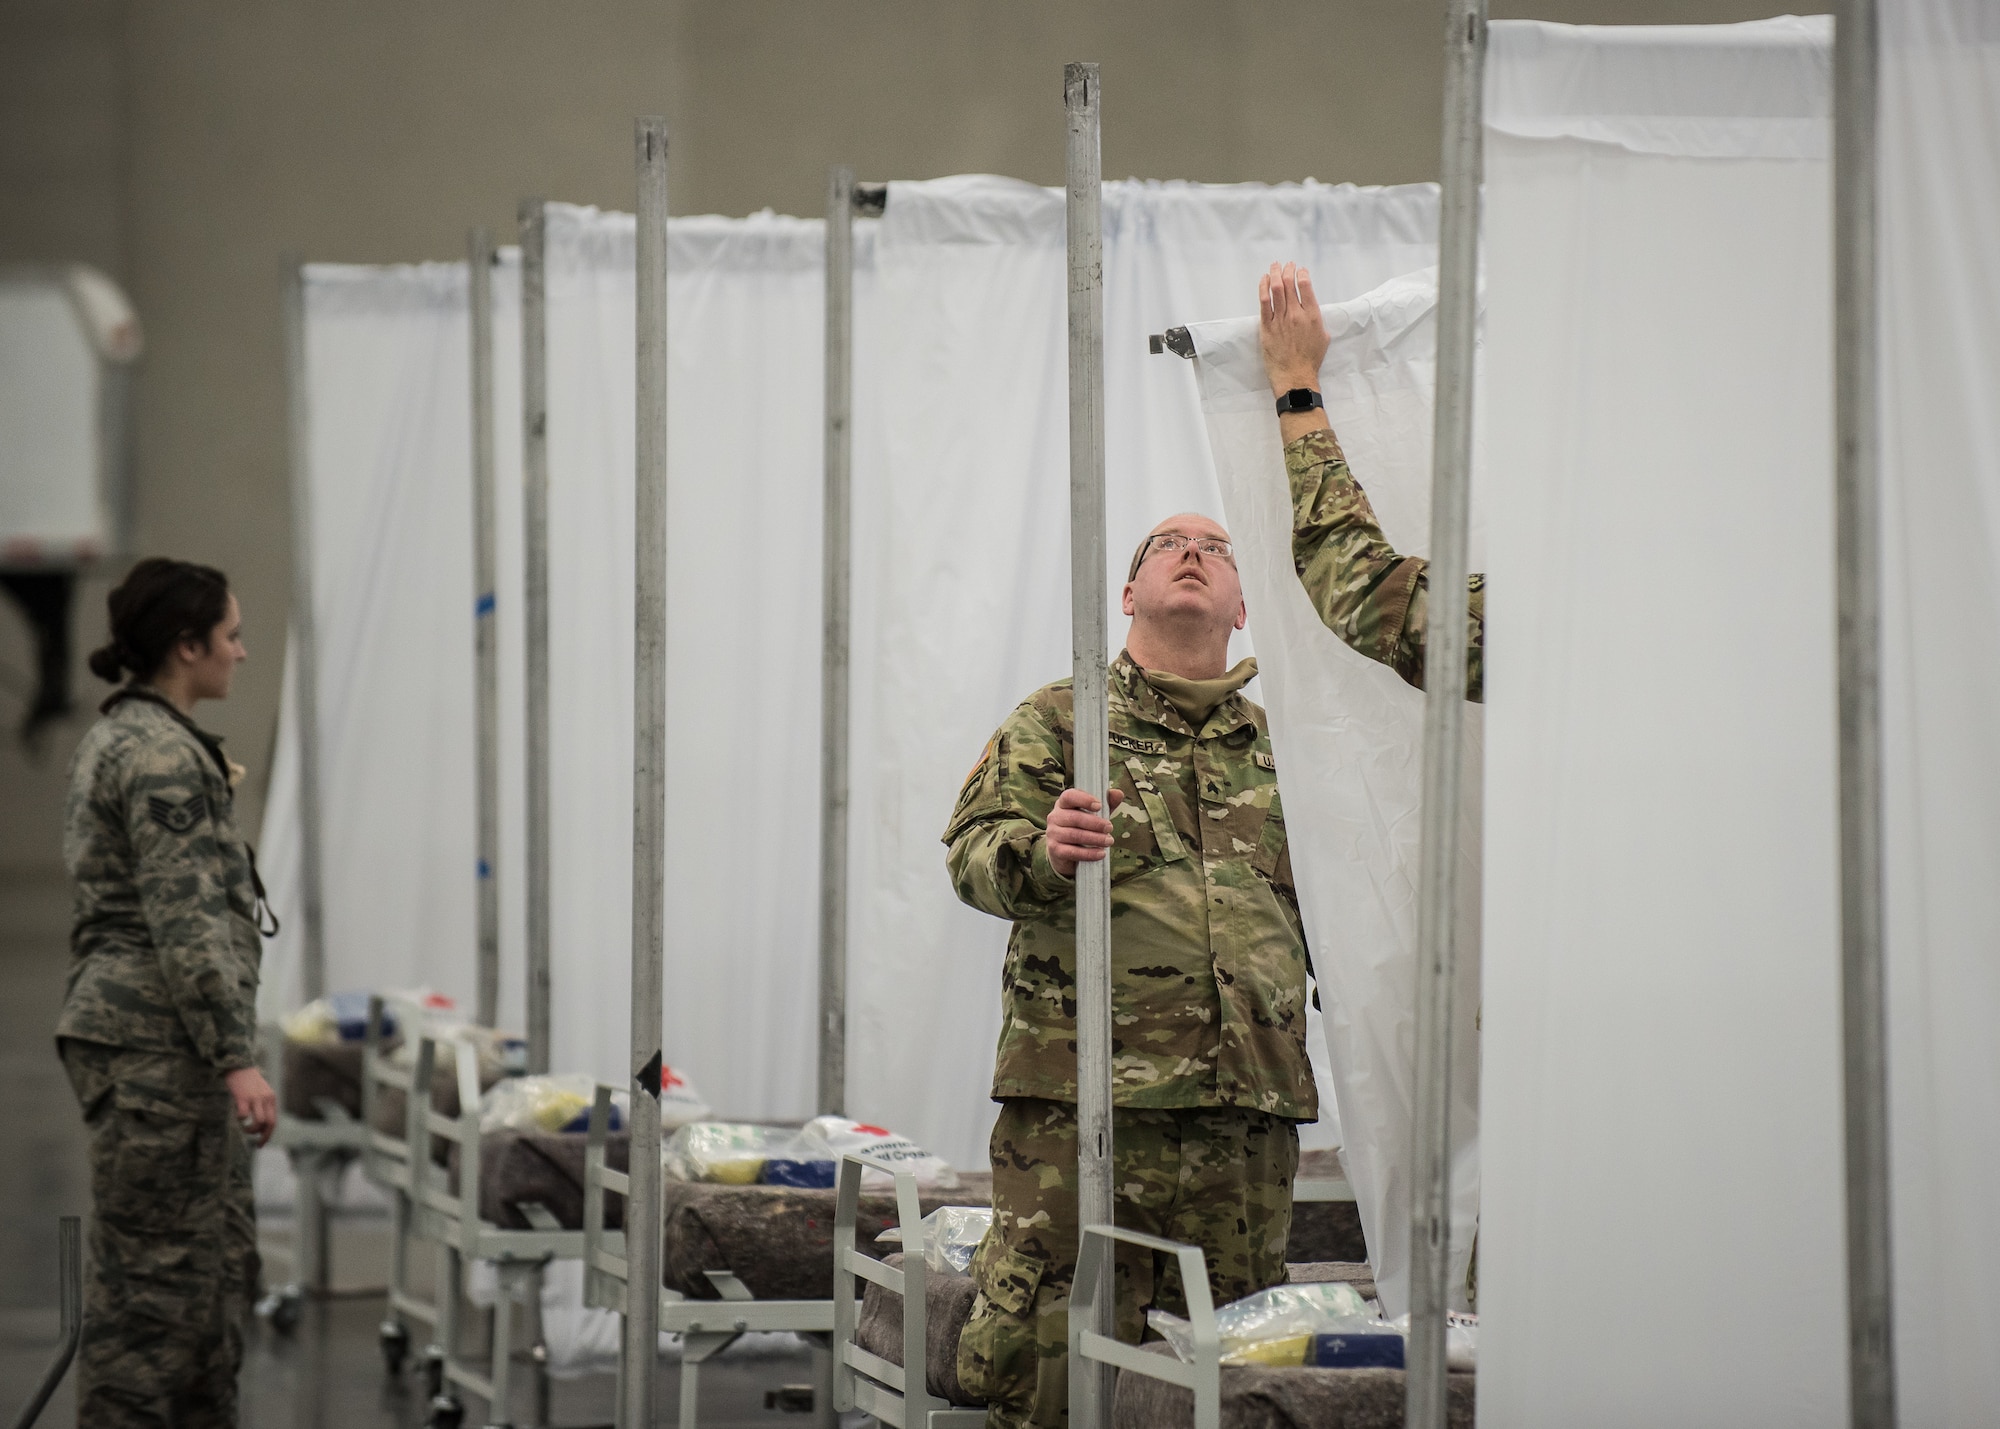 Soldiers from the Kentucky Army National Guard’s 103rd Chemical Battalion set up vinyl partitions to go between hospital beds at the Kentucky Fair and Exposition Center in Louisville, Ky., April 14, 2020. The site, which is expected to be operational April 15, will serve as an Alternate Care Facility for patients suffering from COVID-19 if area hospitals exceed available capacity. The location initially can treat up to 288 patients and is scalable to 2,000 beds. (U.S. Air National Guard photo by Dale Greer)